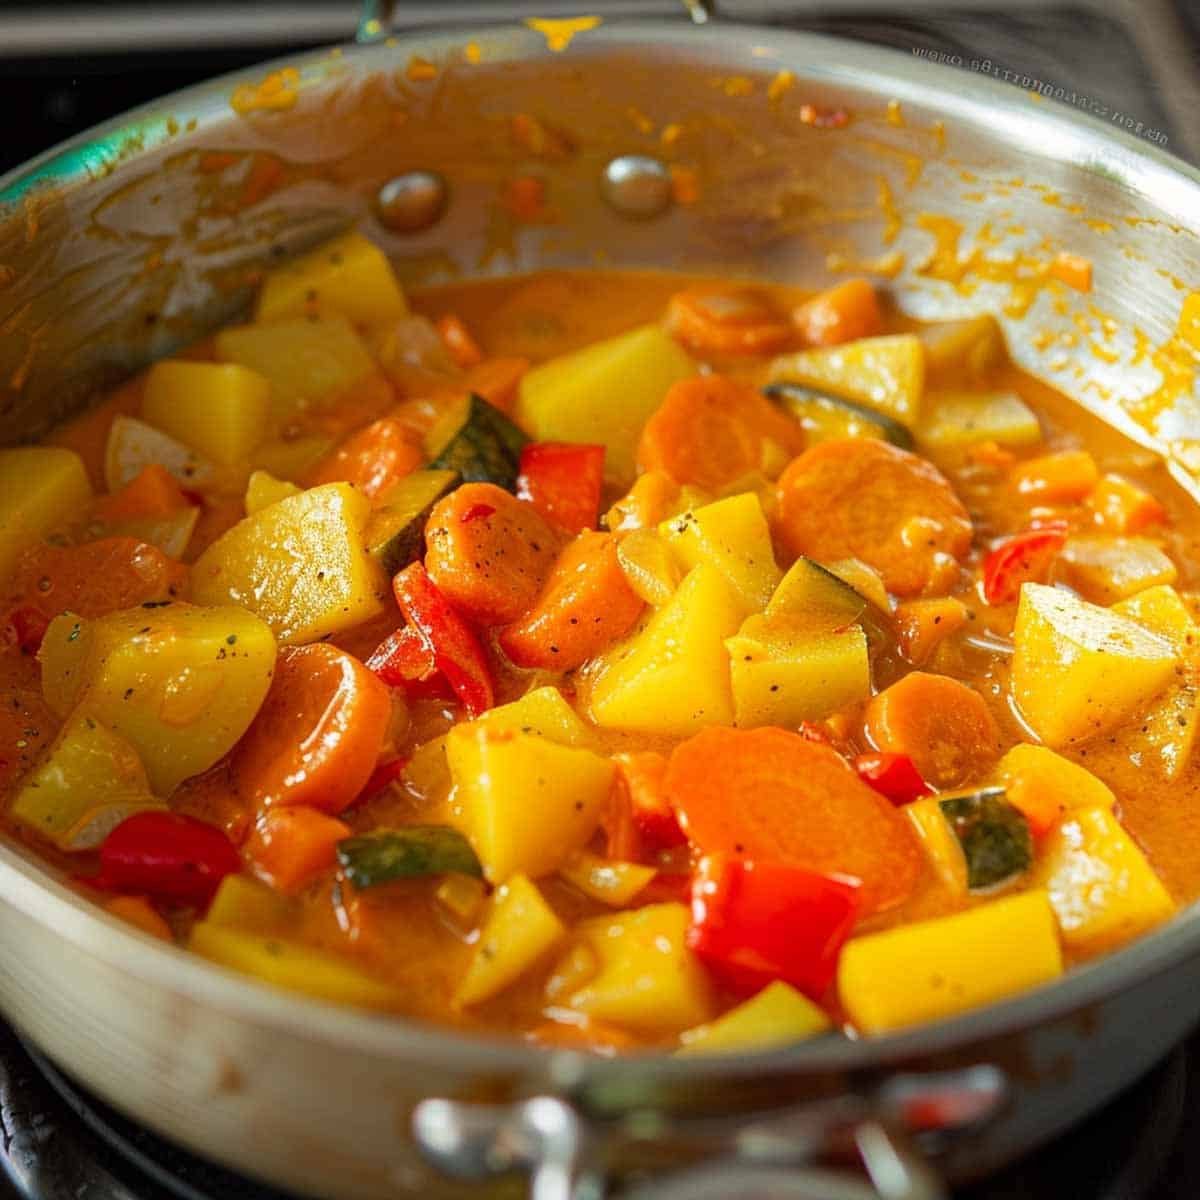 Diced potatoes, sliced carrots, and red bell peppers being added to a pot and stirred into the curry mixture